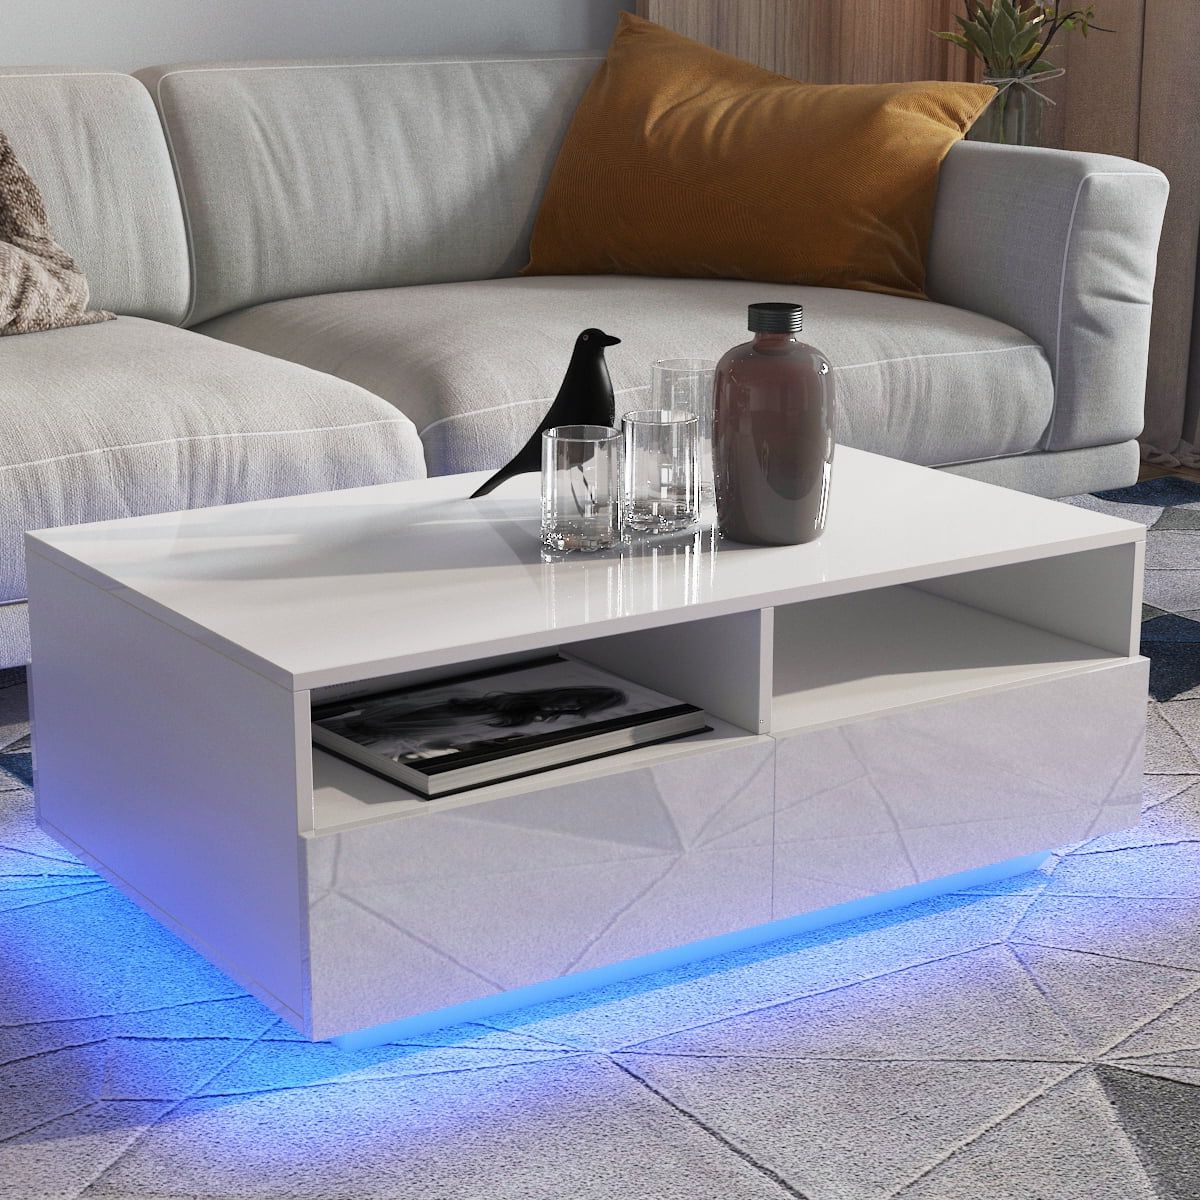 Hommpa Coffee Table With 4 Drawers And Open Shelf Led Center Table Sofa Side  Tea Tables White High Gloss Finish – Walmart Regarding Best And Newest Led Coffee Tables With 4 Drawers (Photo 4 of 10)